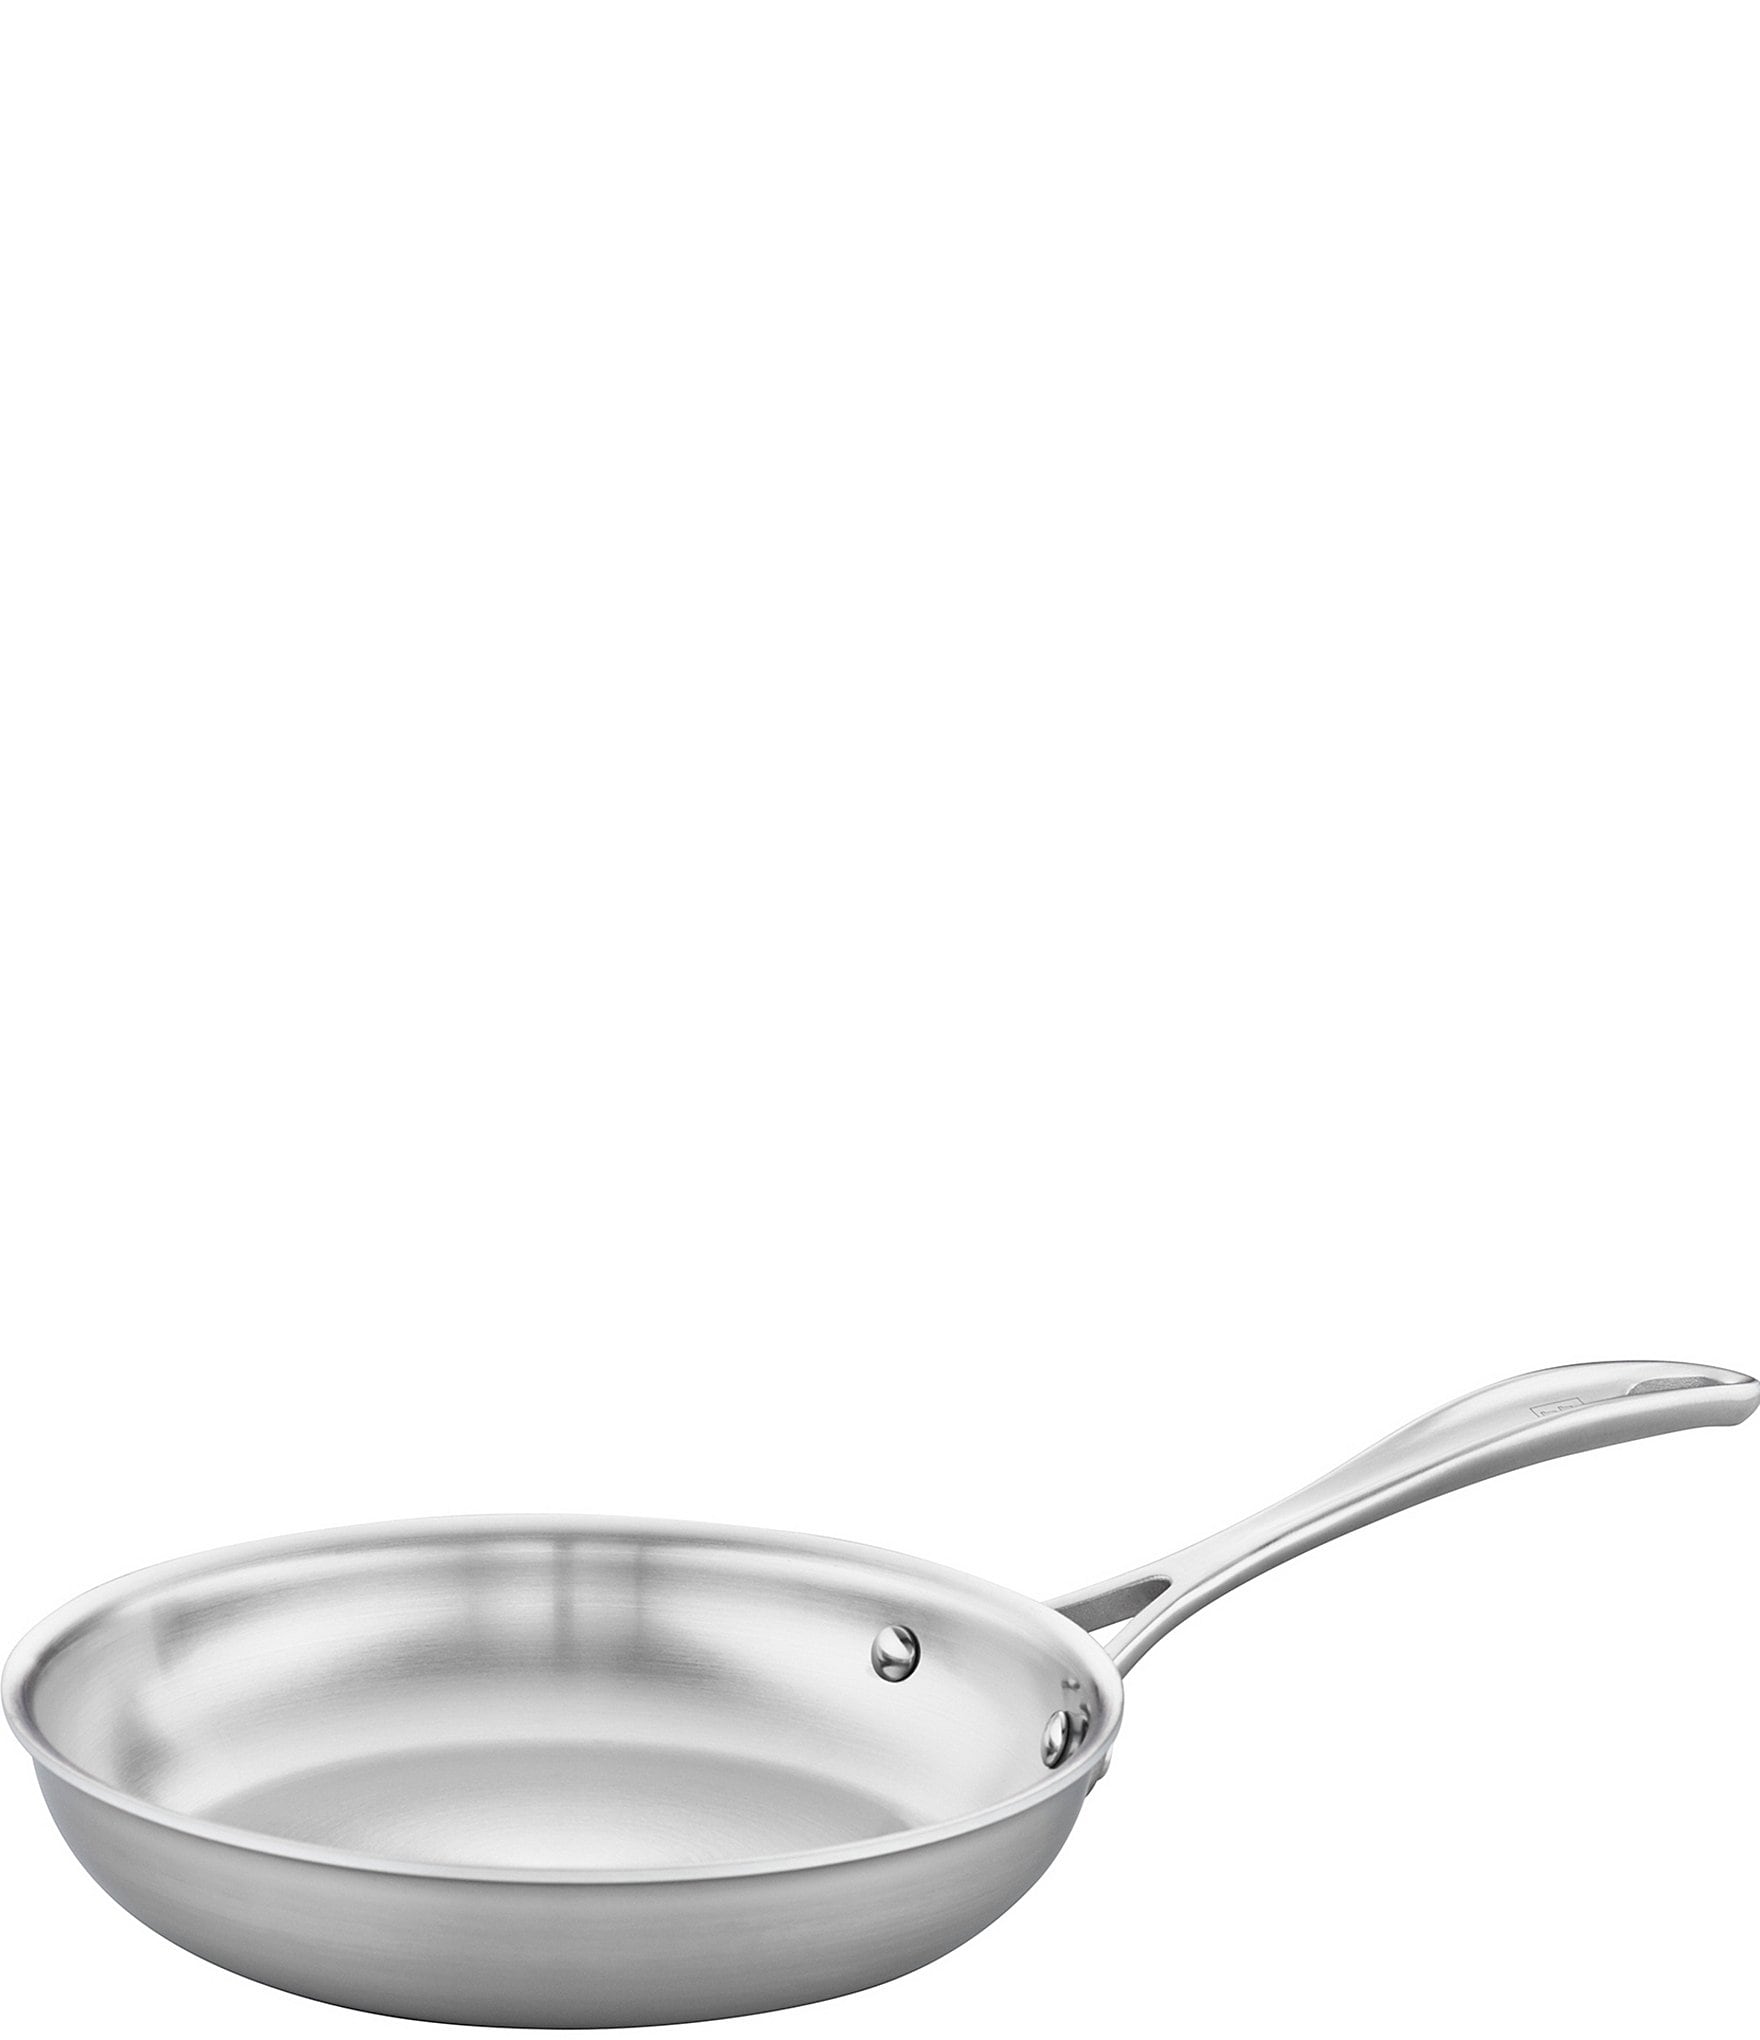 Tramontina Prima 5-qt. Stainless Steel Tri-Ply Covered Saute Pan